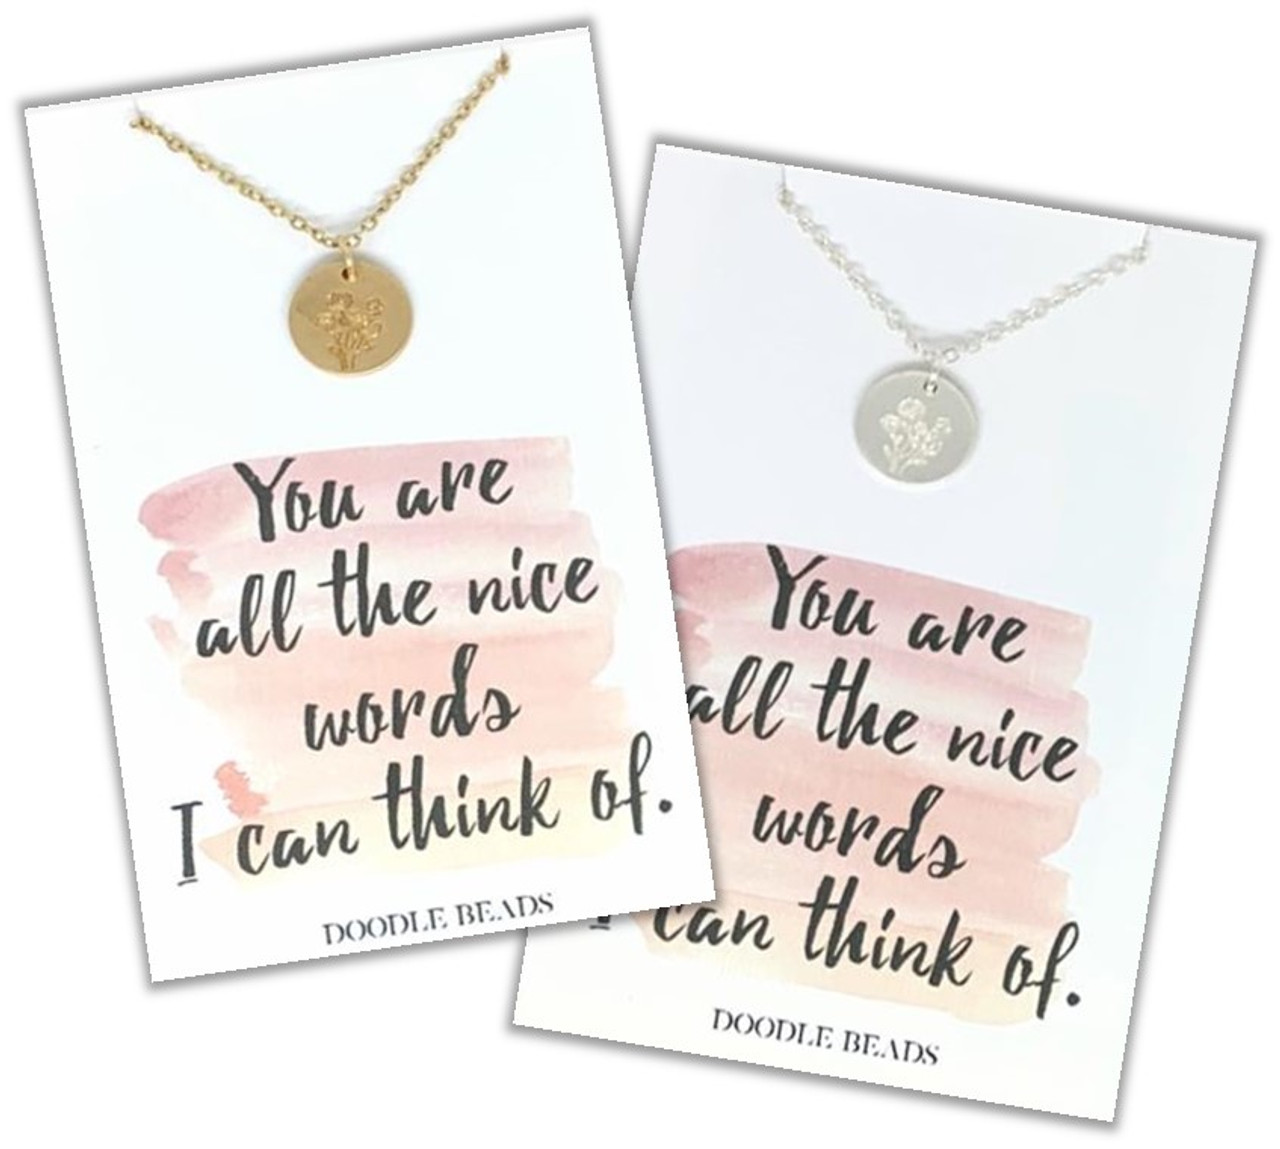 Stamped Wildflower Necklace With Quote, “You Are All The Nice Words I Can Think Of” (Gold or Silver) Pick your color to order*